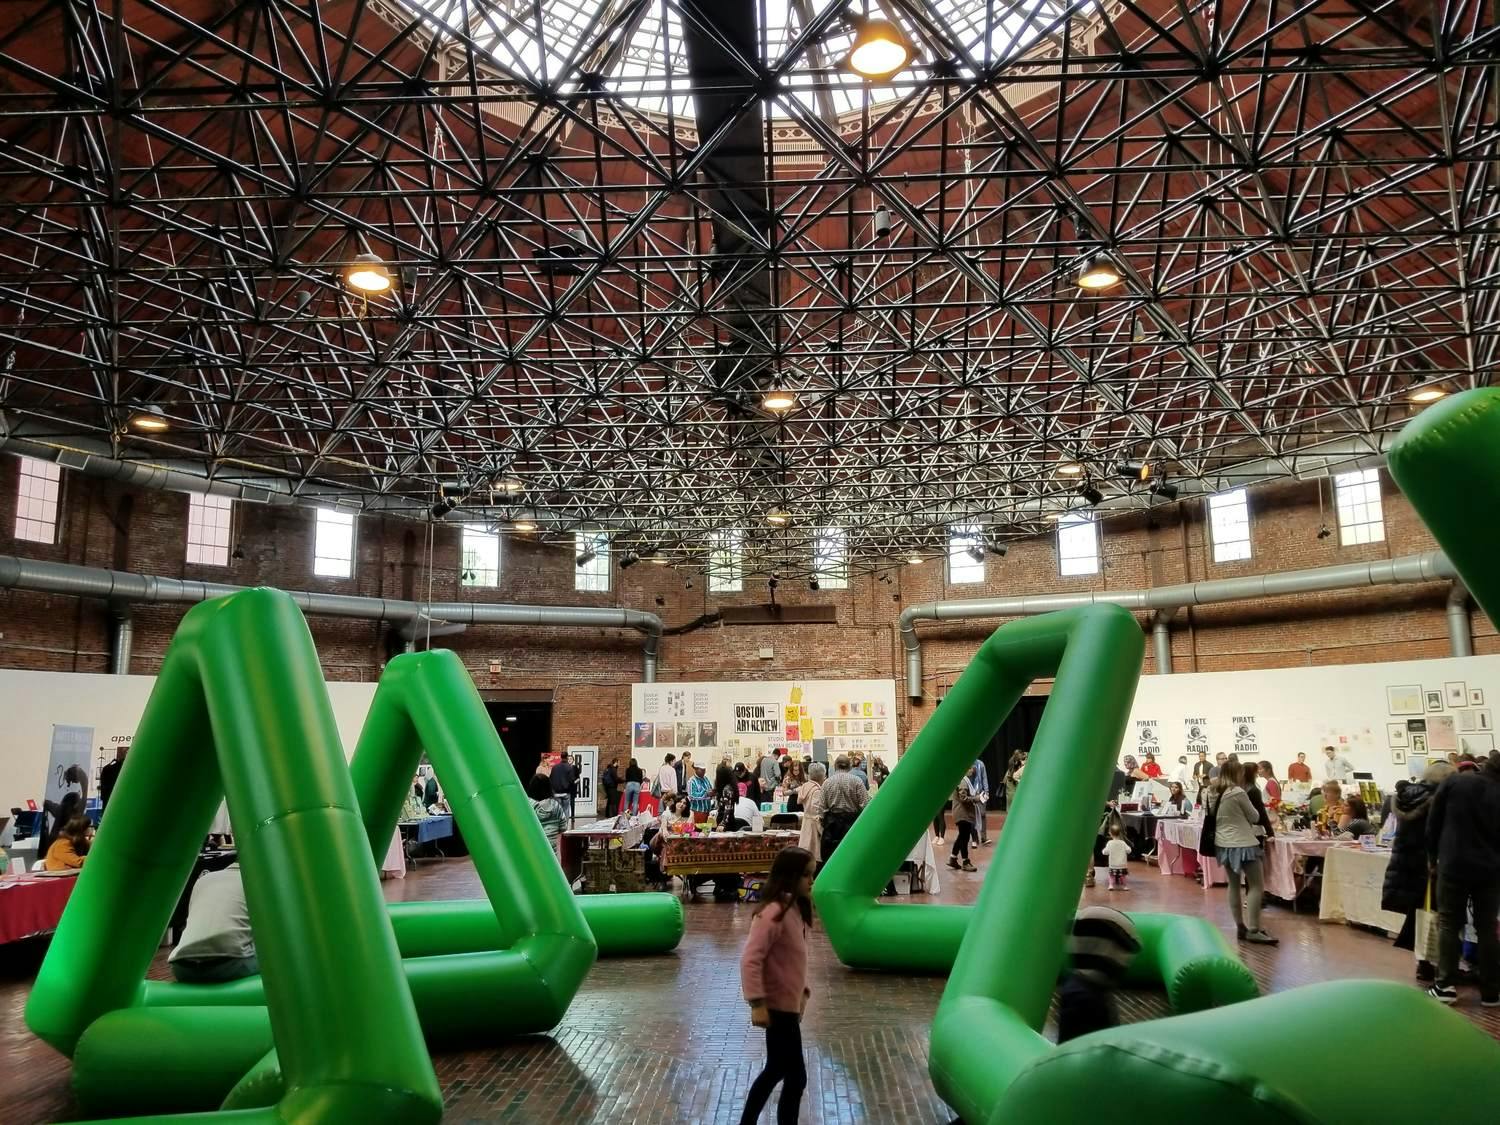 Visitors explore the Boston Art Book Fair at the Cyclorama, where large, green, inflatable structures are on display.